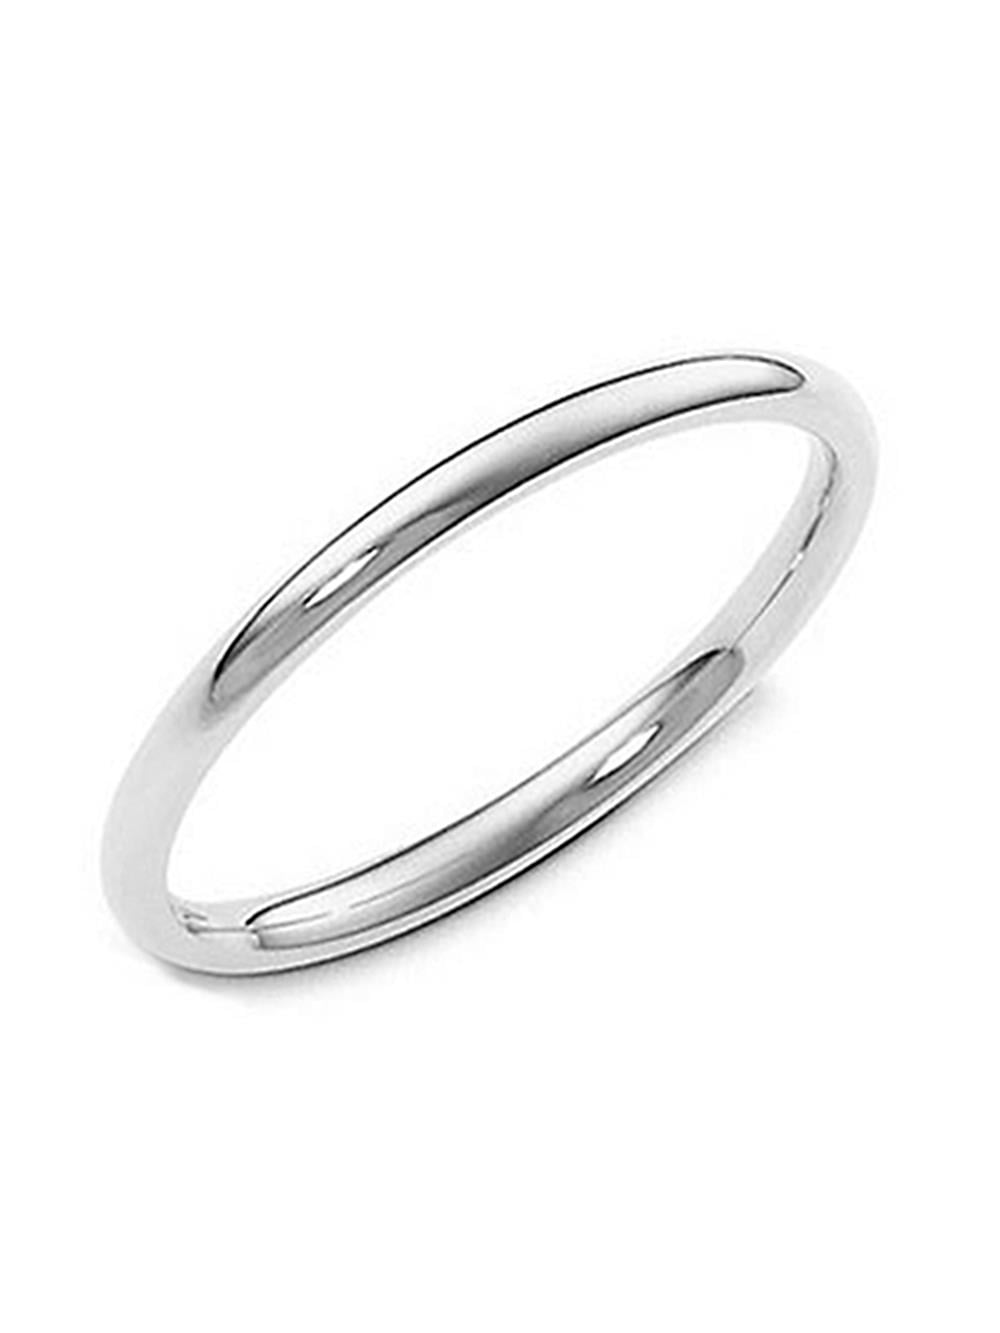 Details about   Casual Unisex Band Ring 925 Sterling Silver Daily Wear Jewelry size US 4-8 